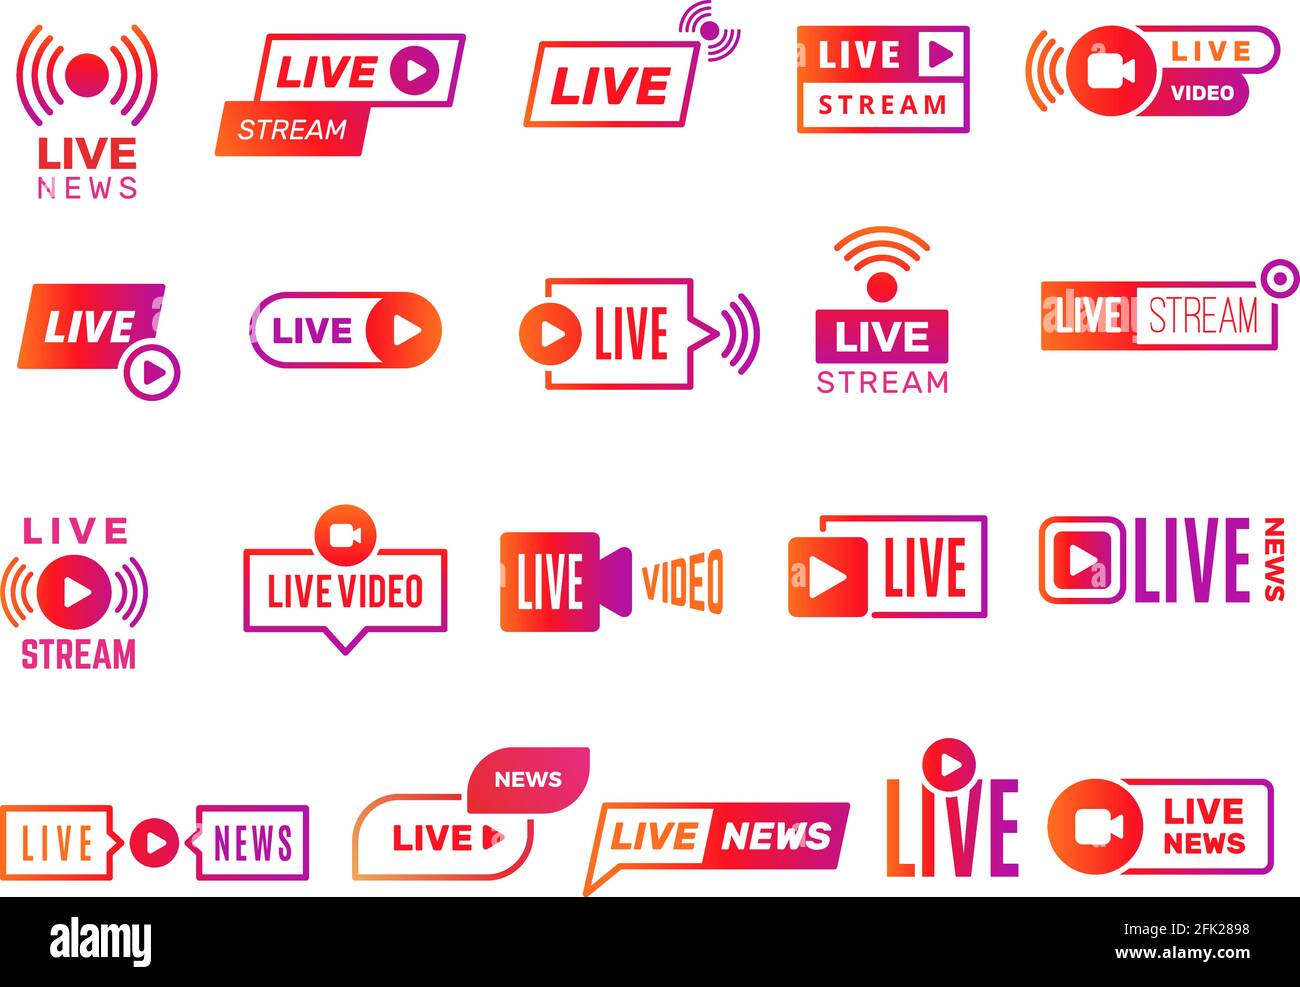 Live stream badges. Video broadcasting shows digital online text templates live news vector stickers collection Stock Vector